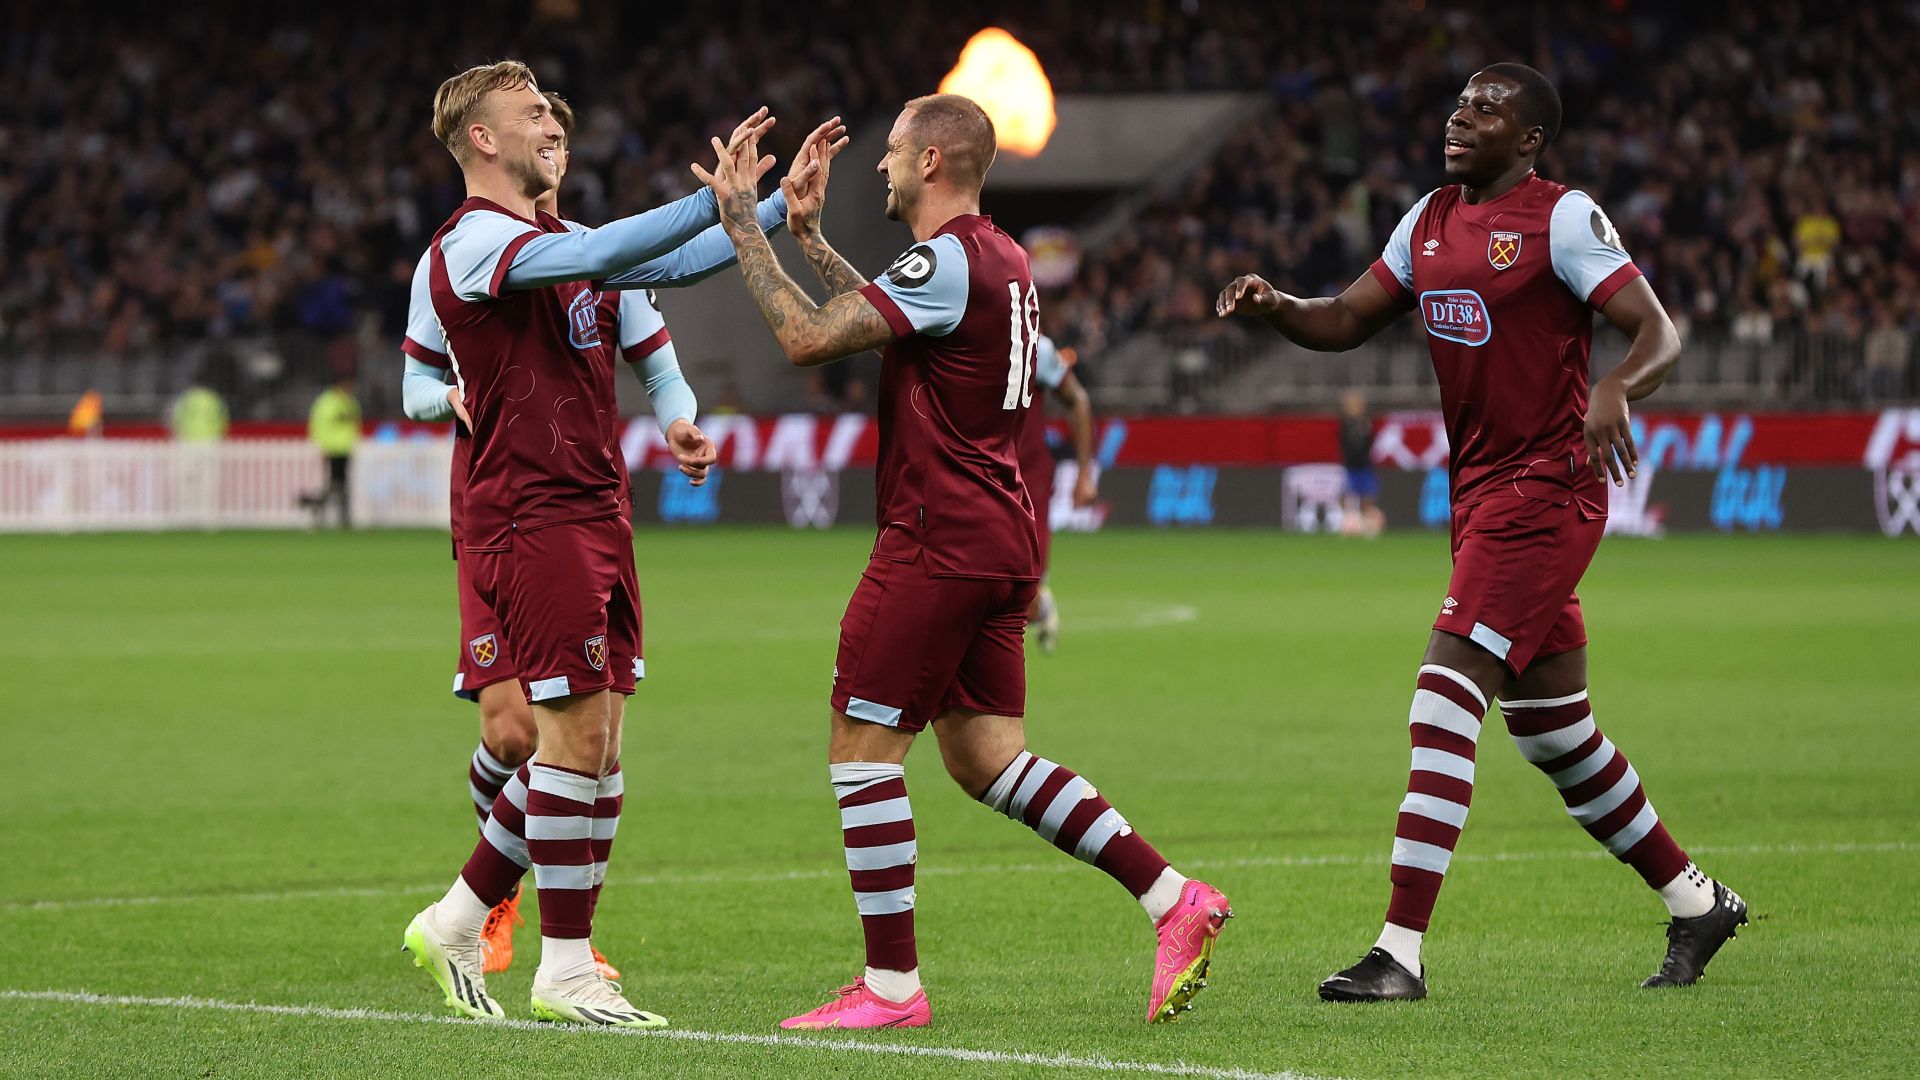 West Ham Are Flying High With a Unique Brand of Counter-Attacking Football